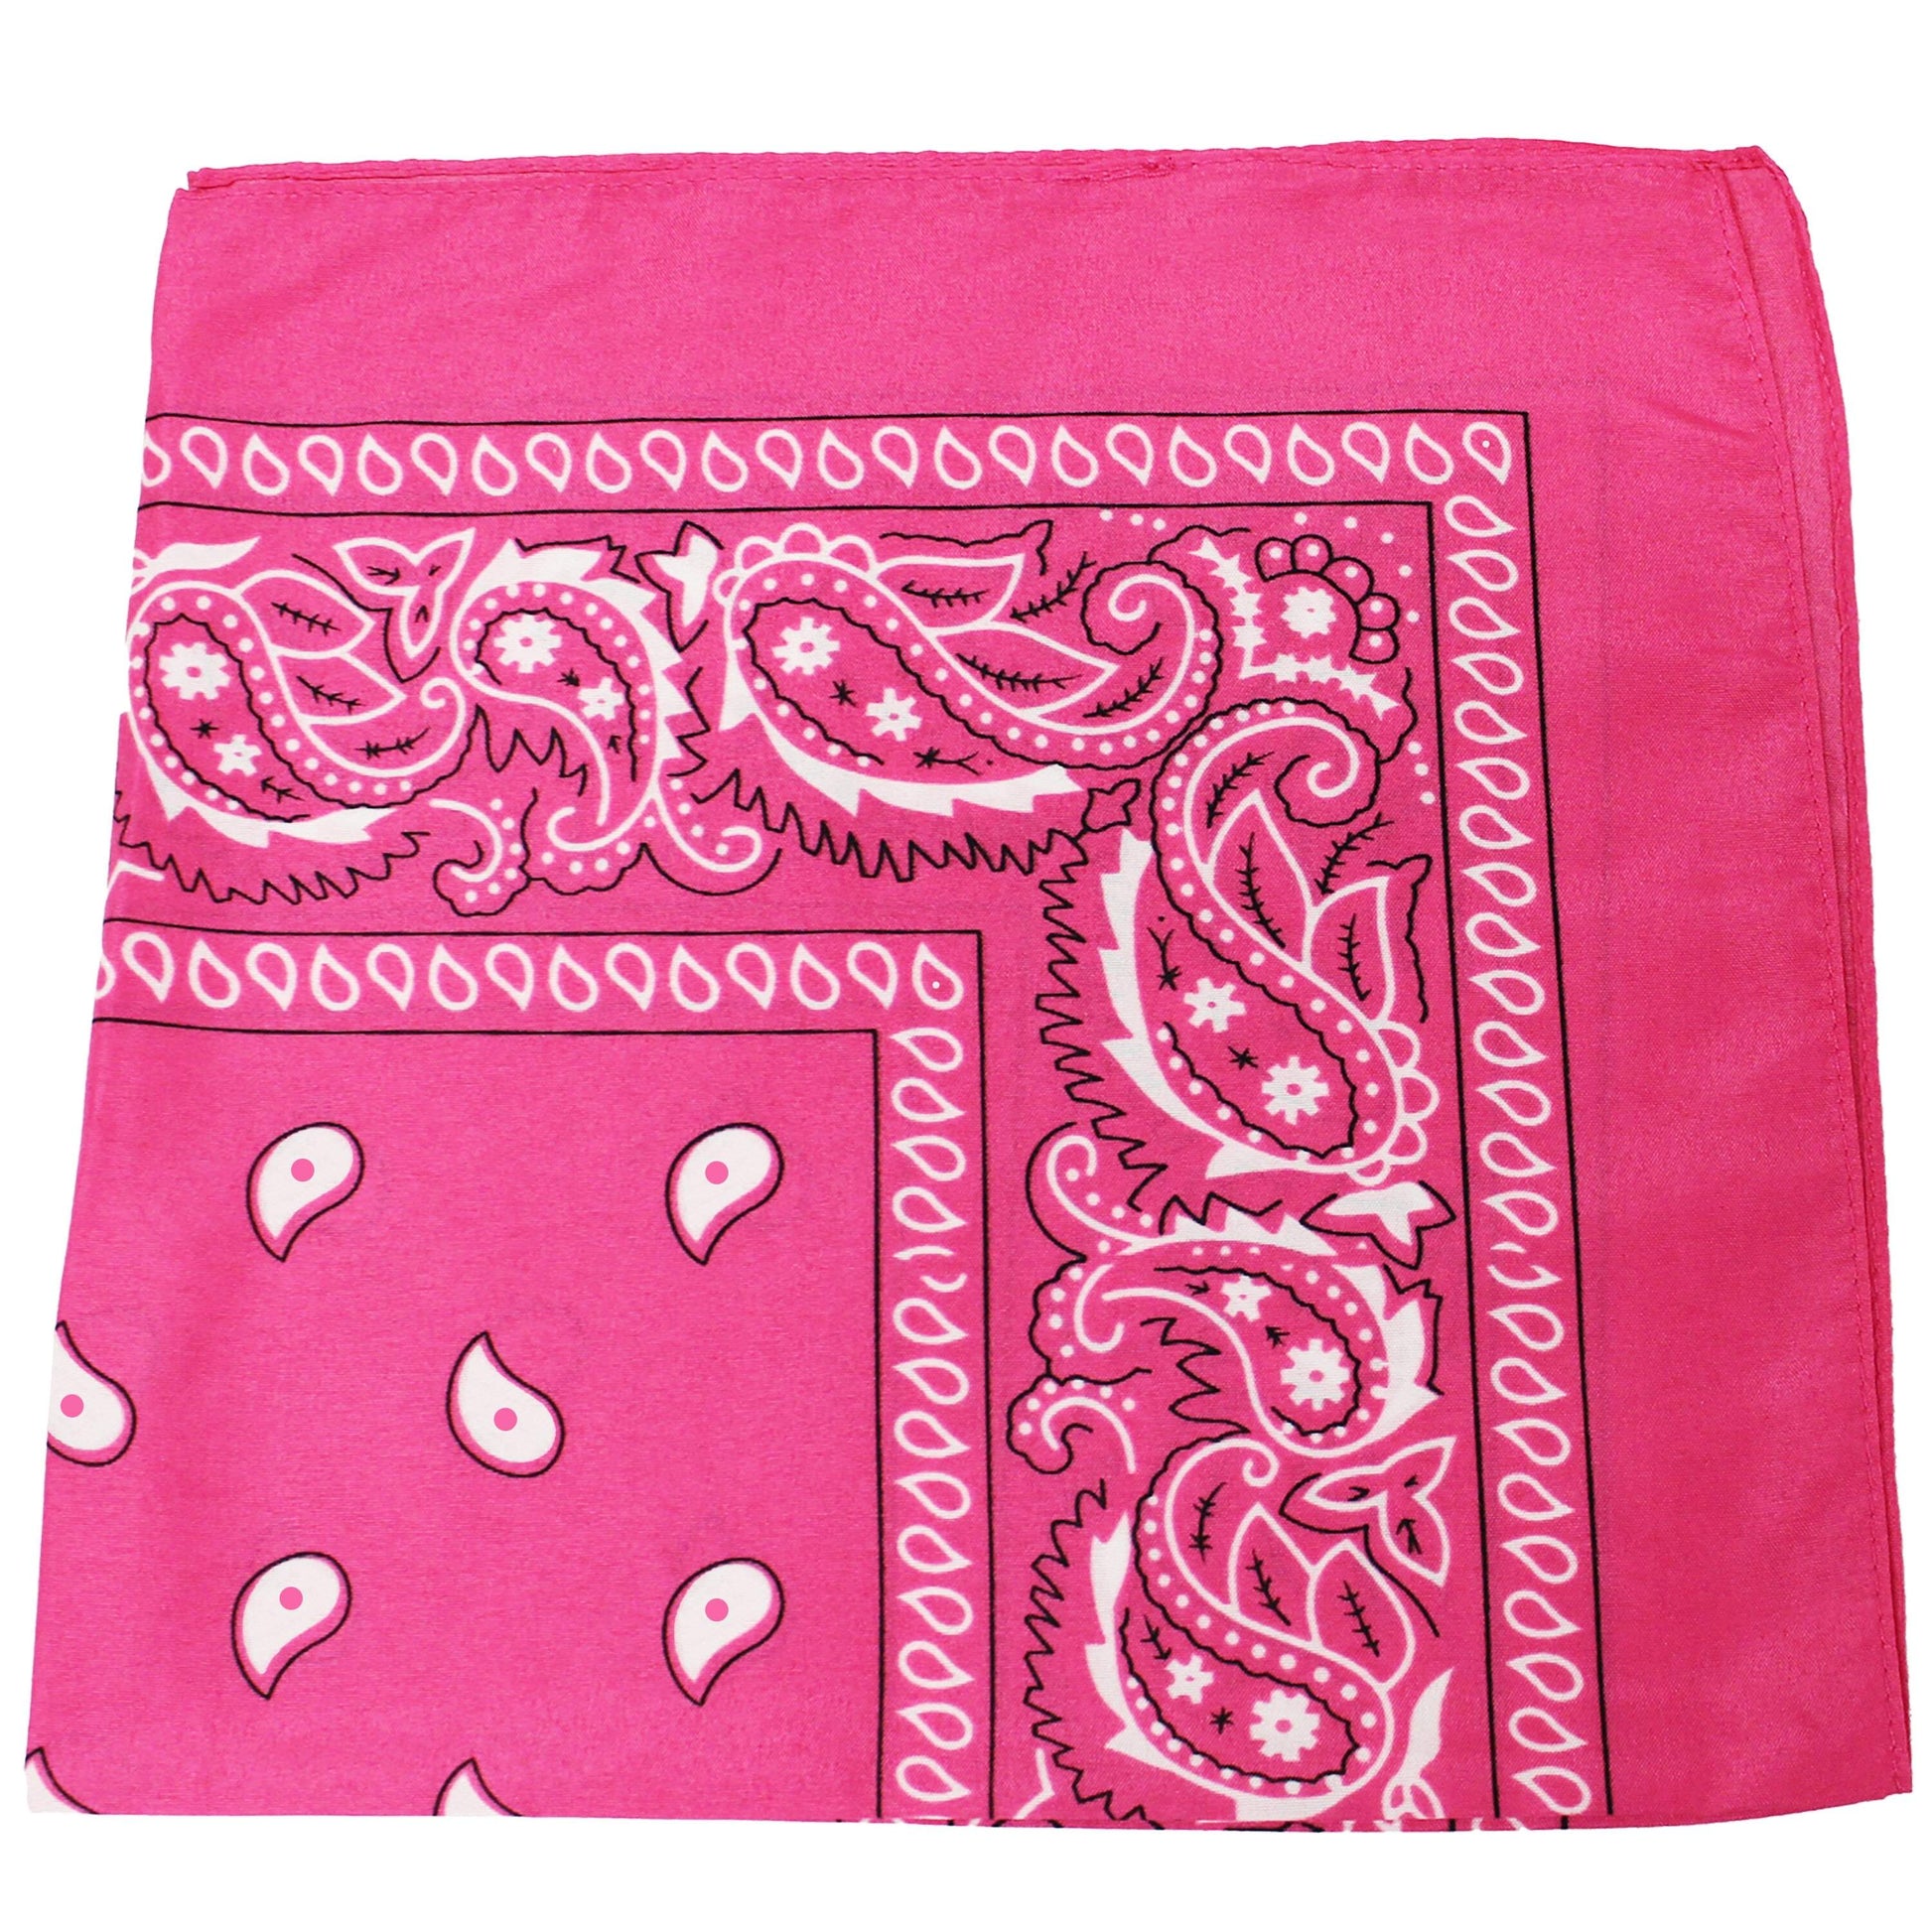 Pack of 12 Paisley Cotton Bandanas Novelty Headwraps - Dozen Available in Many Colors - 22 inches